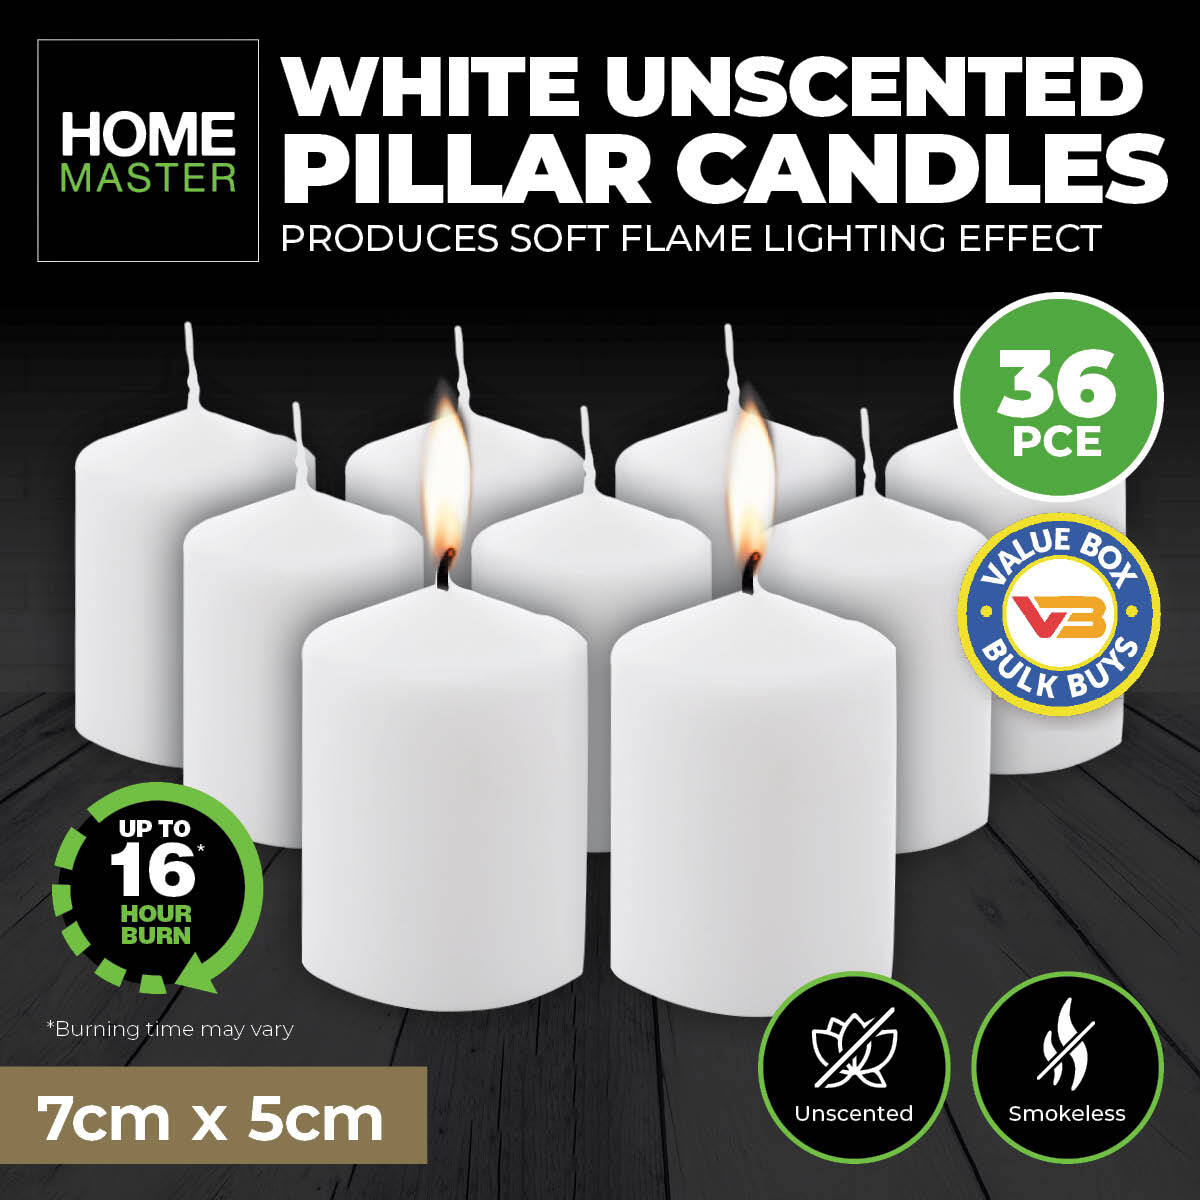 Home Master 36PCE Pillar Candles White Unscented Lead Free Wick 16 Hours 7cm